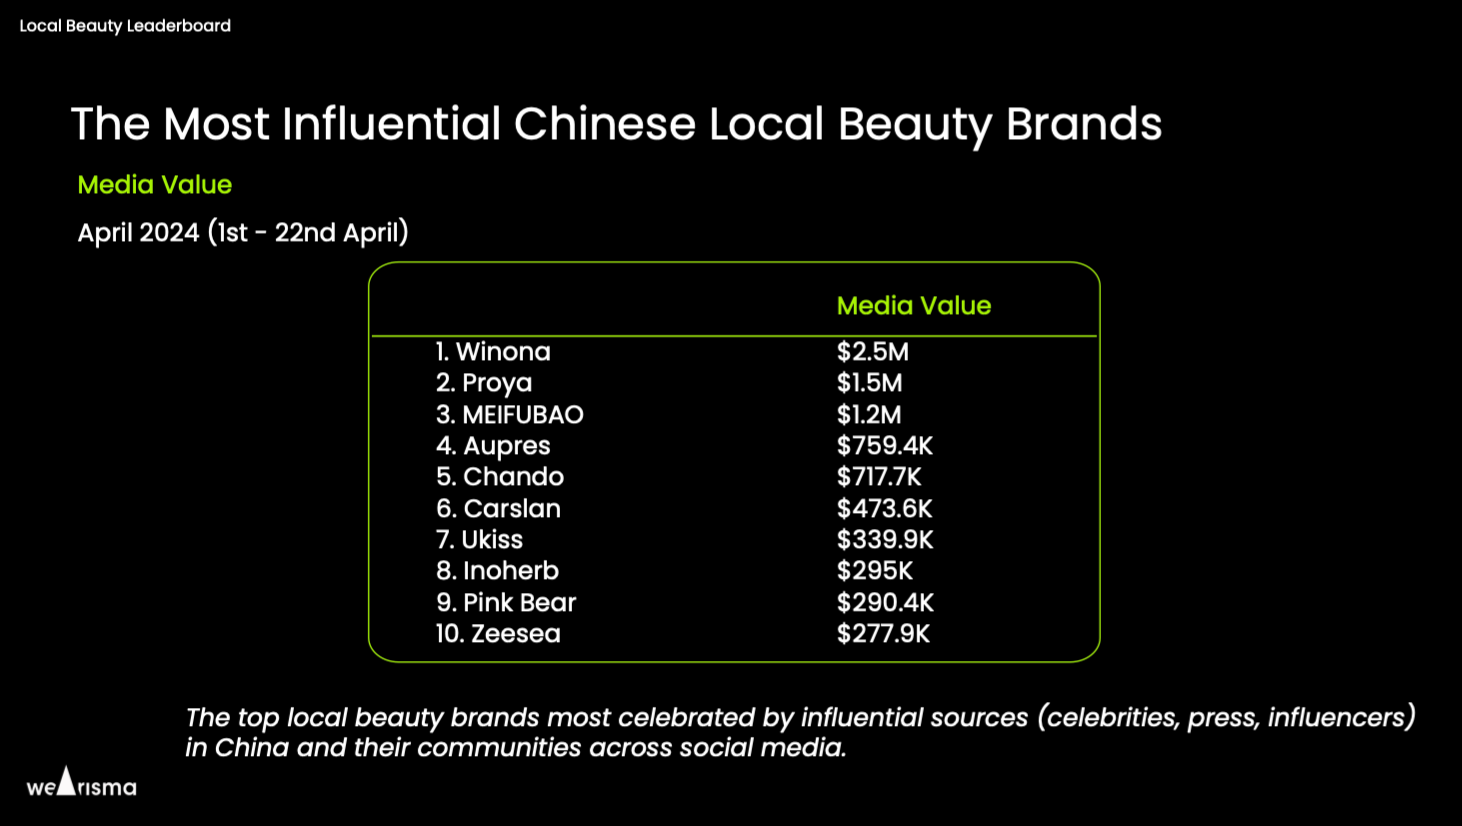 The top local beauty brands in China and their communities across social media. Image: WeArisma